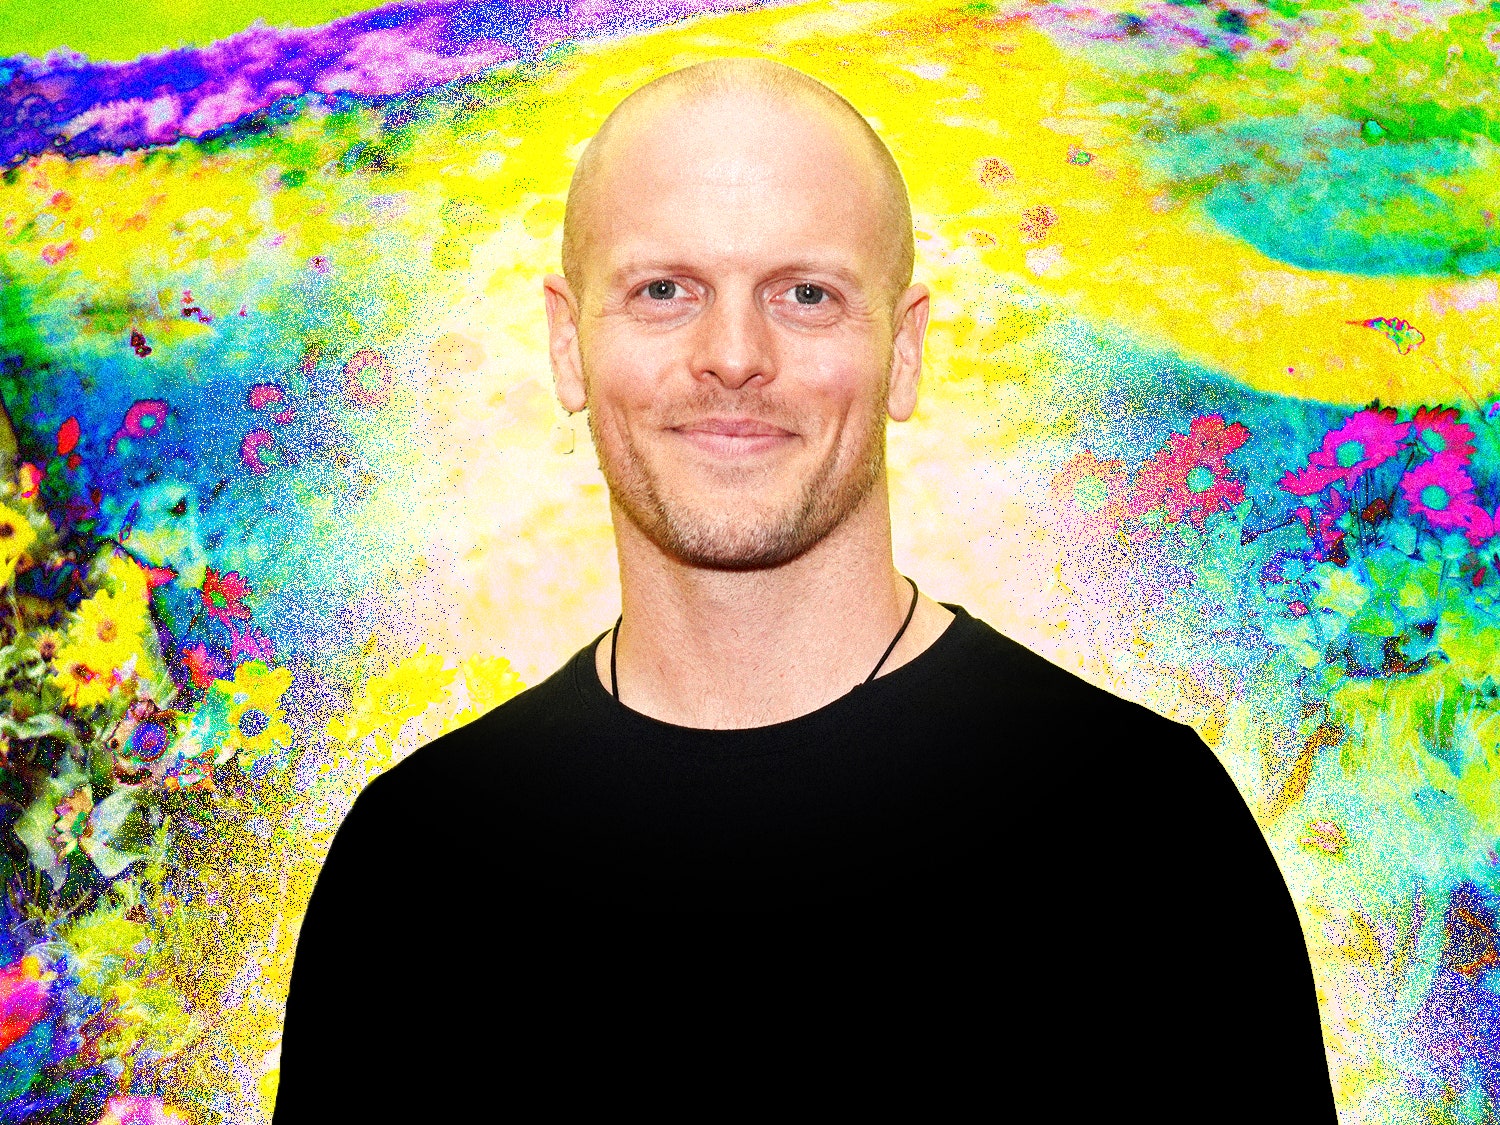 From Productivity to Psychedelics: Tim Ferriss Has Changed His Mind About Success